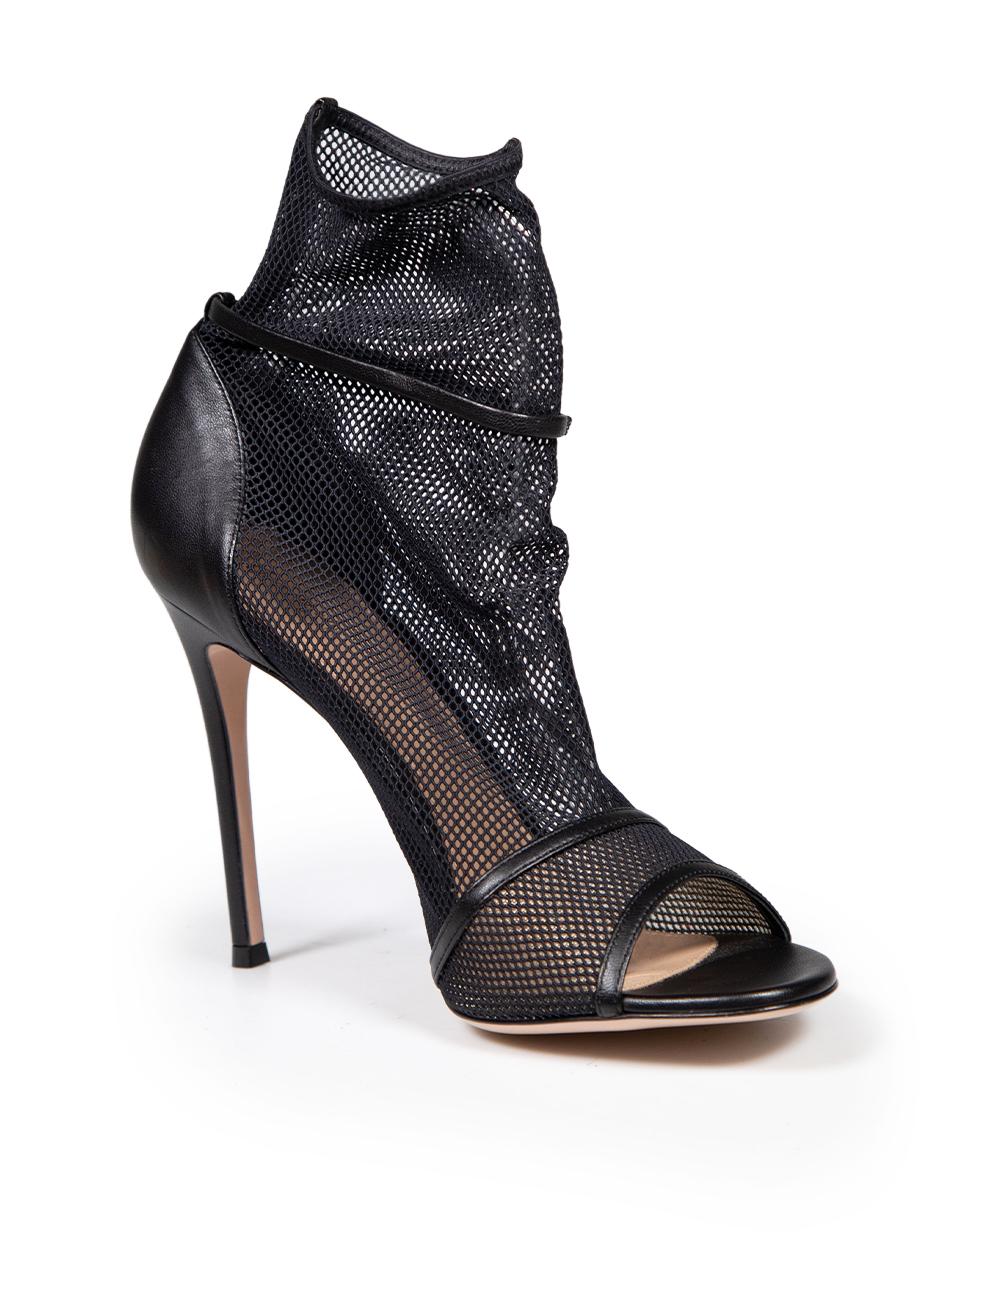 CONDITION is Never worn. No visible wear to heels is evident on this new Gianvito Rossi designer resale item. This item comes with original dust bag.
 
 
 
 Details
 
 
 Model: Idol
 
 Black
 
 Leather and mesh
 
 Ankle heels
 
 High heeled
 
 Open